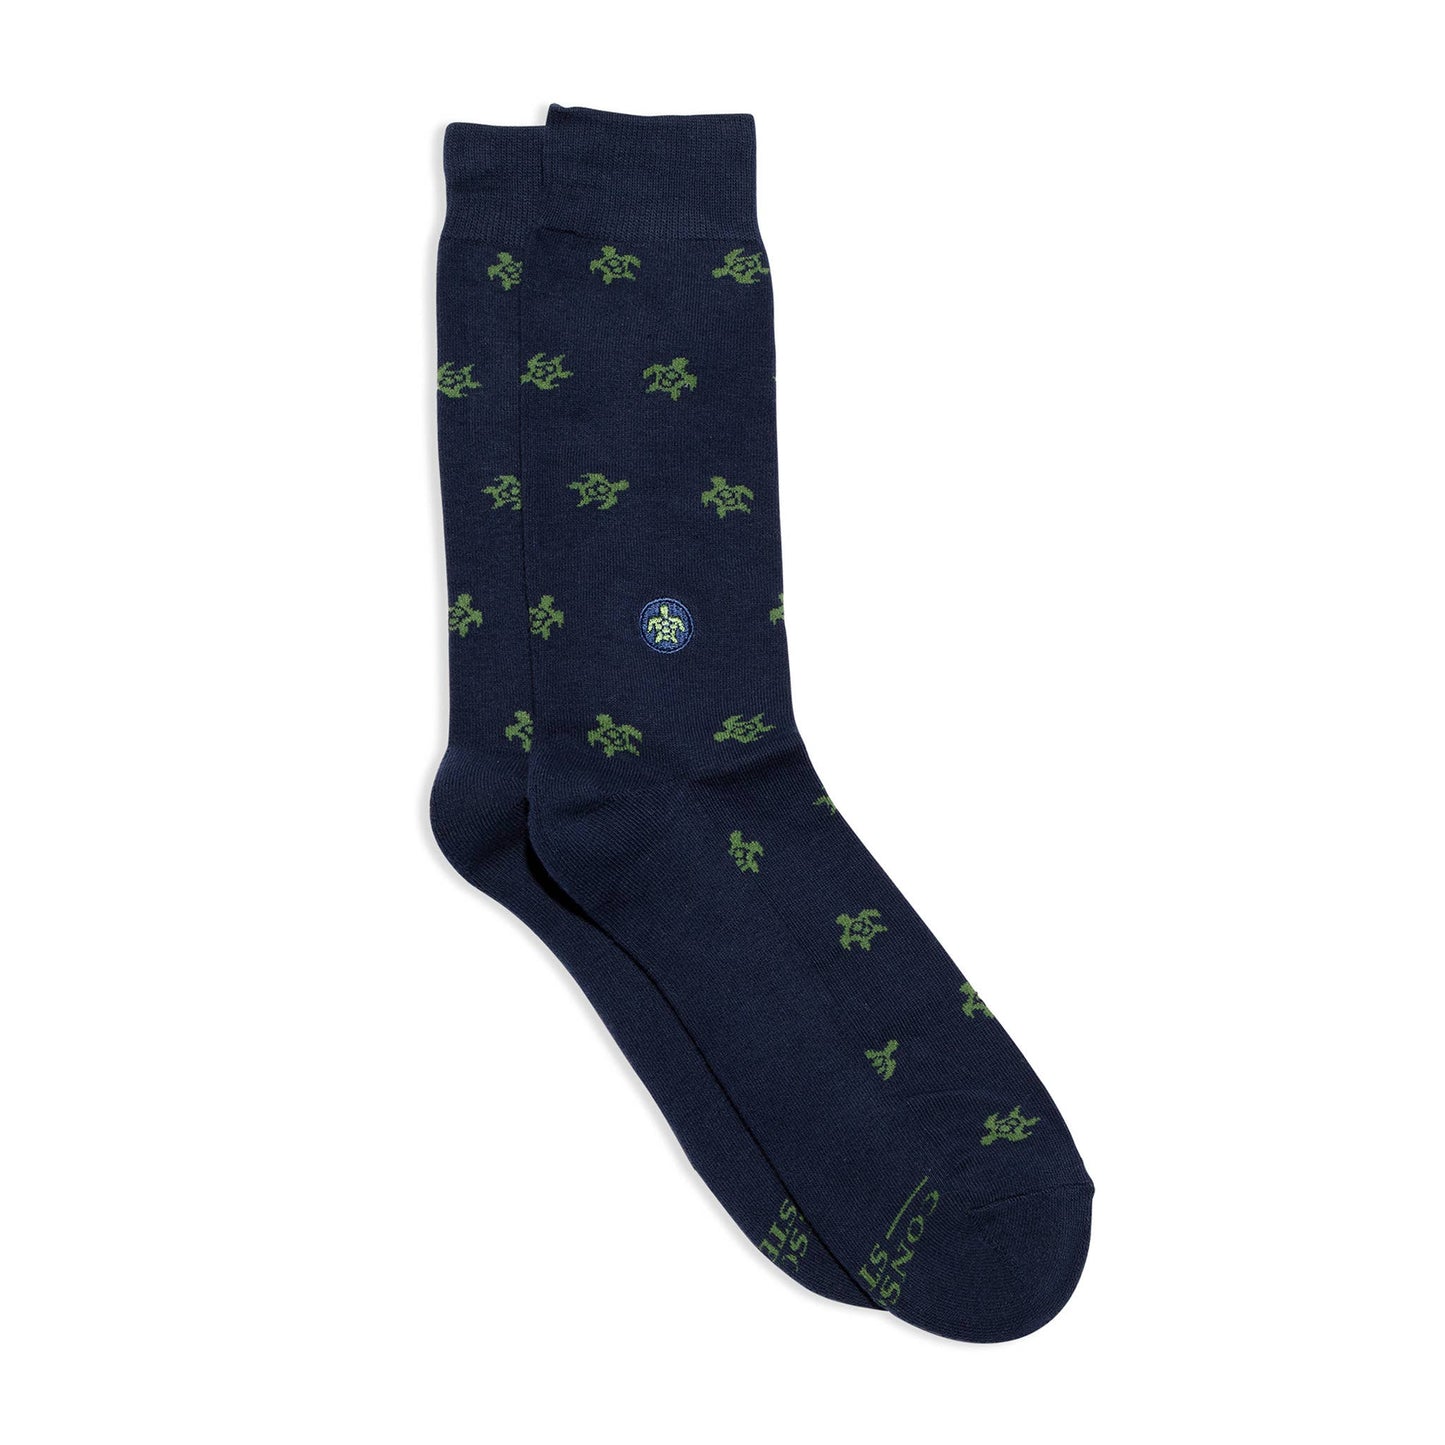 Conscious Step - Socks that Protect Turtles (Navy Turtles): Small / Default